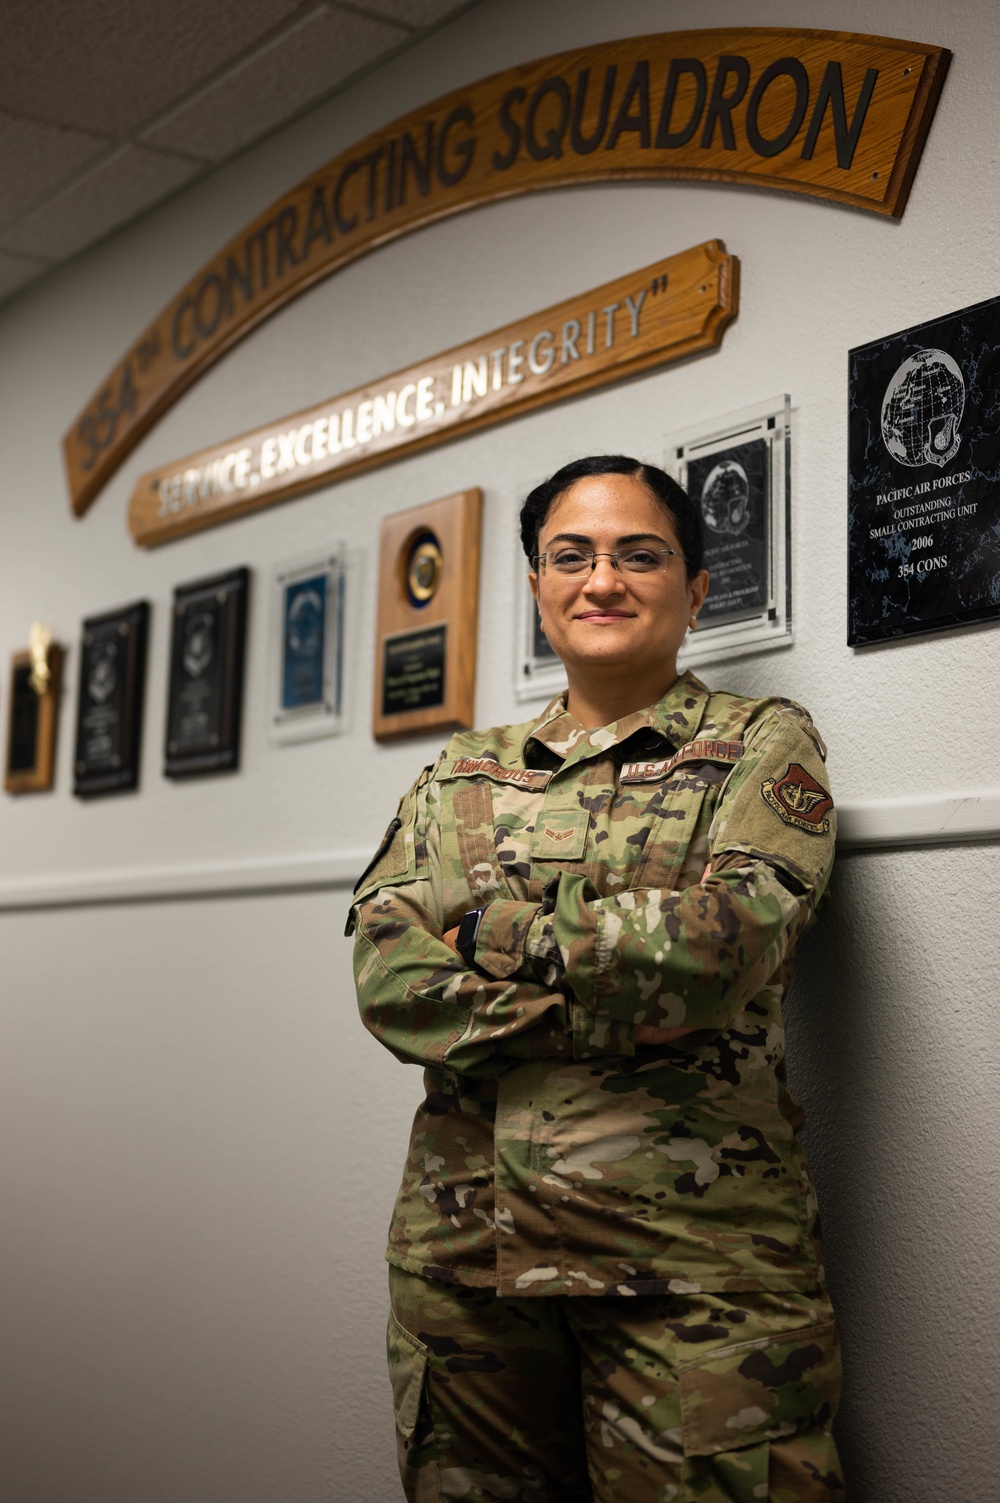 Against all odds: An Airman’s journey from Egypt to the U.S. Air Force